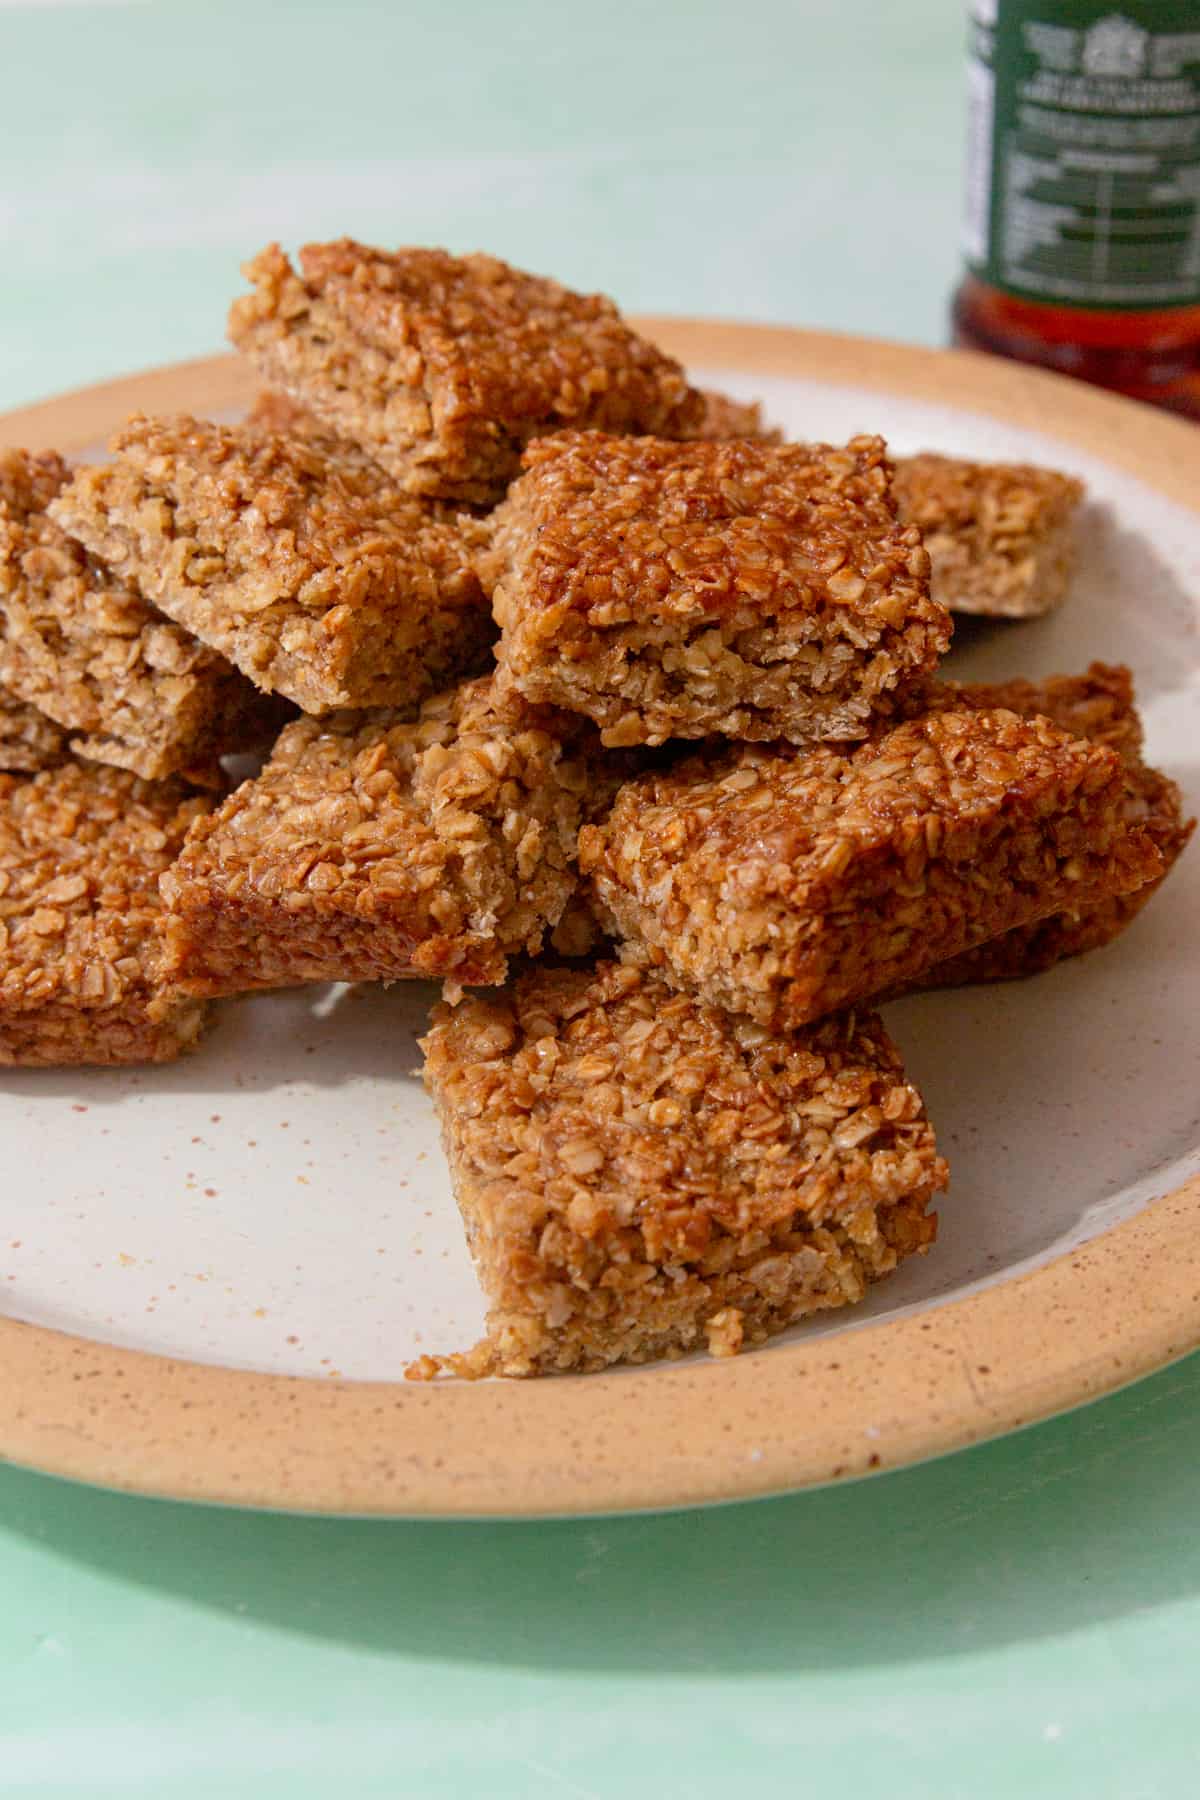 Lots of flapjack squares piled on a plate witha pale green background with a container of golden syrup in partial view.